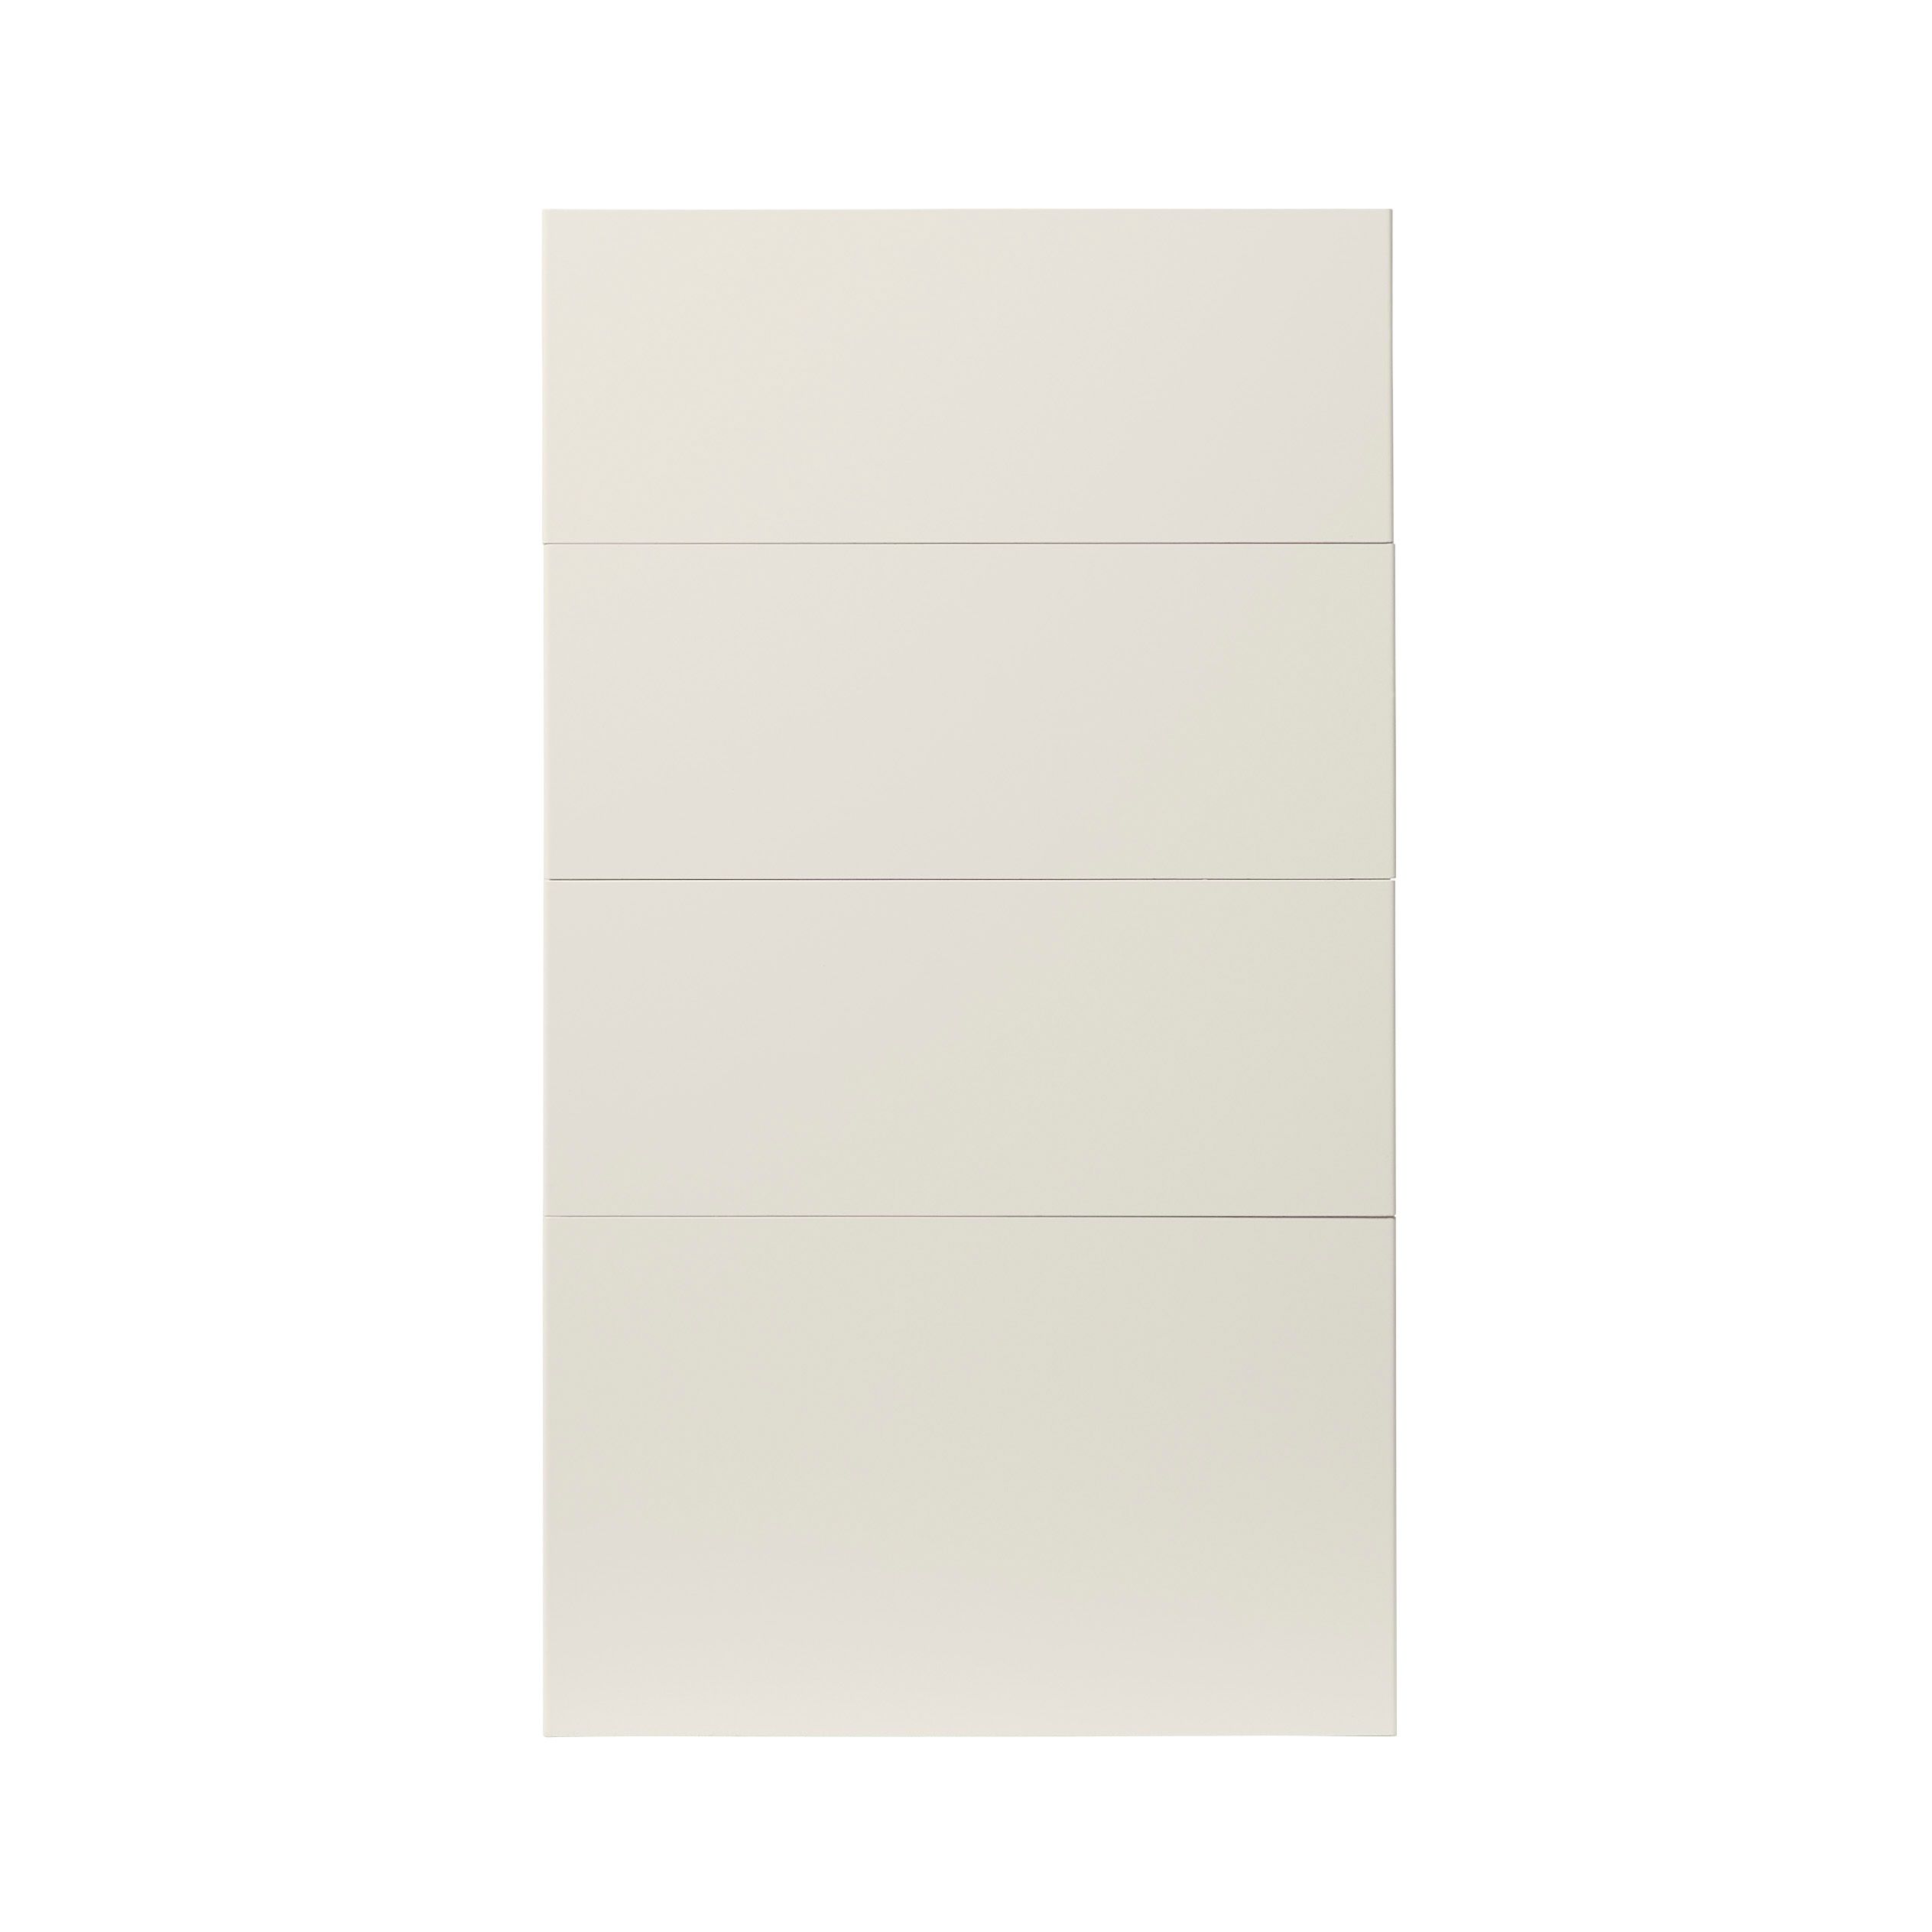 GoodHome Stevia Gloss cream slab Drawer front (W)400mm, Pack of 4